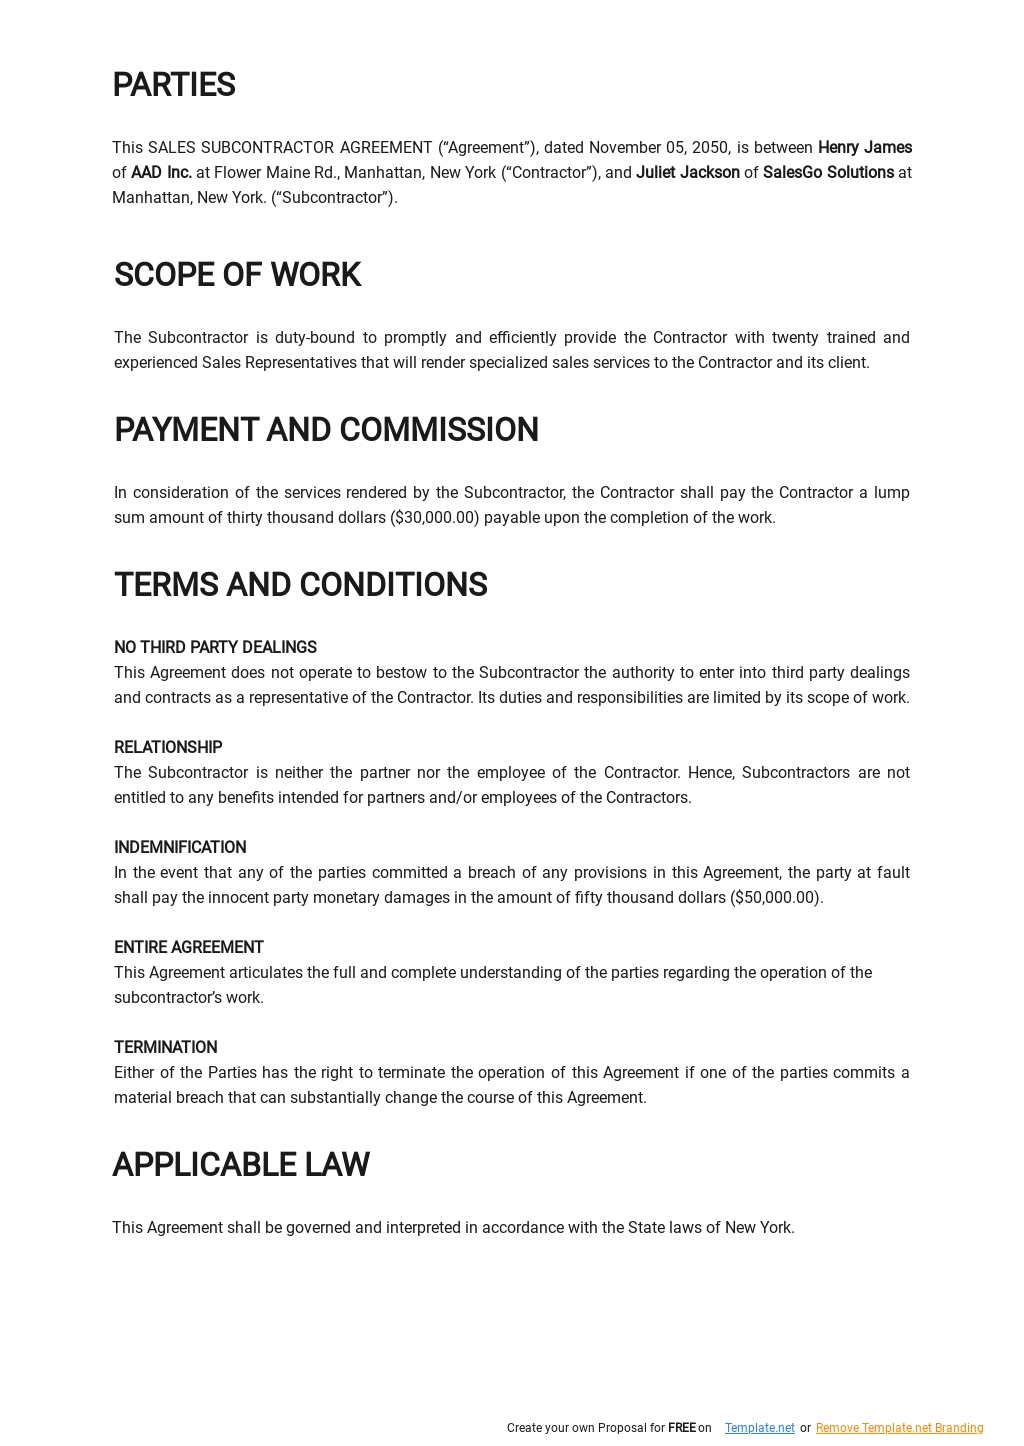 Sales Subcontractor Agreement Template 1.jpe